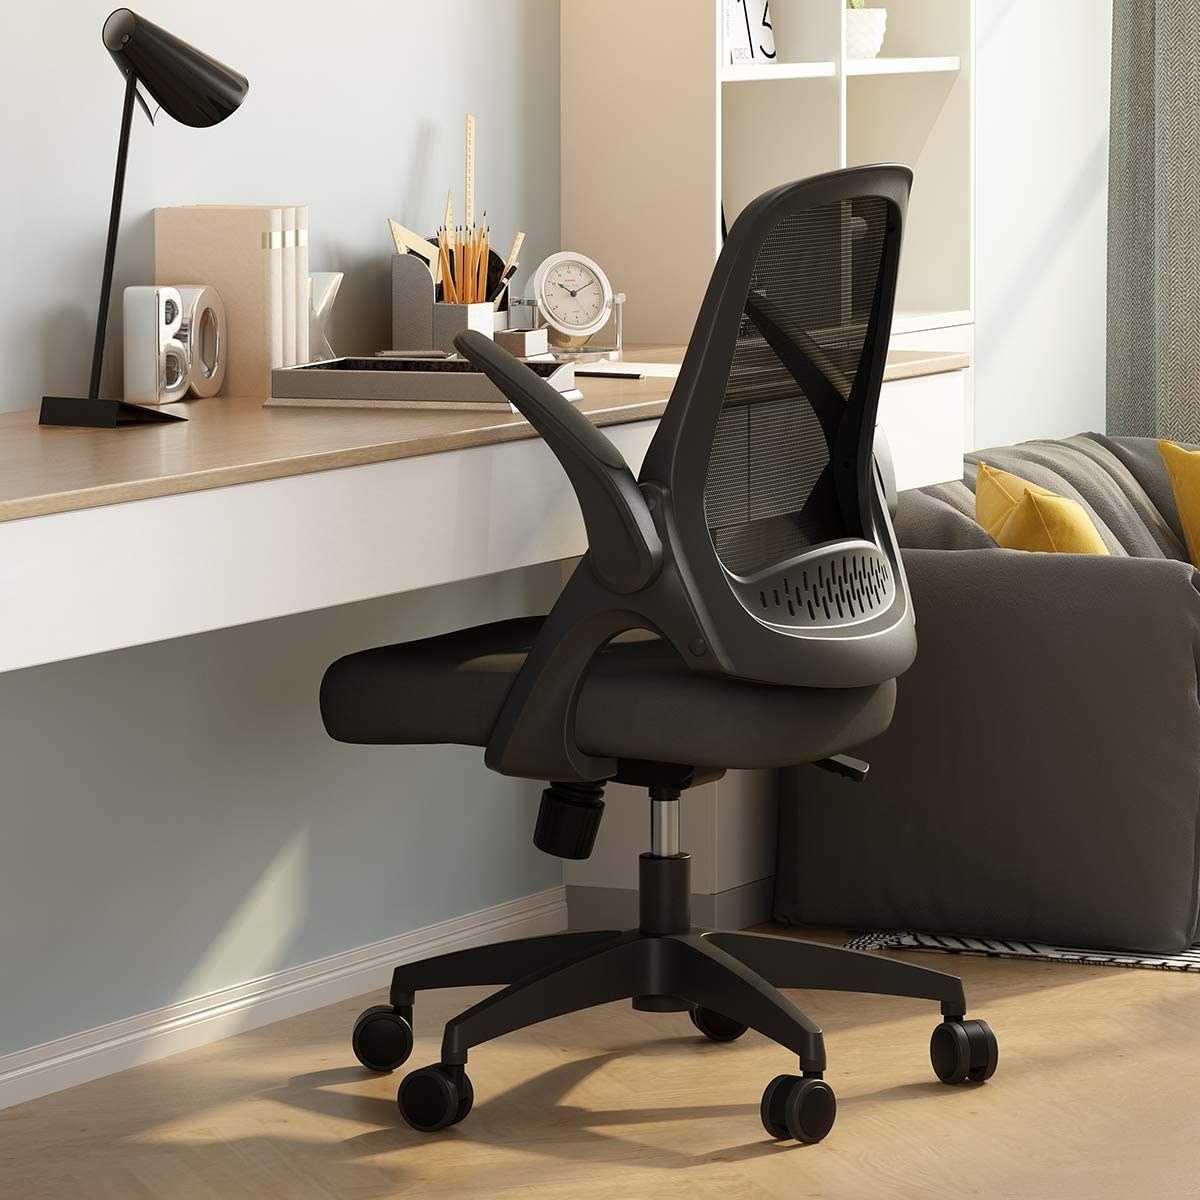 Adjustable office chair placed at desk